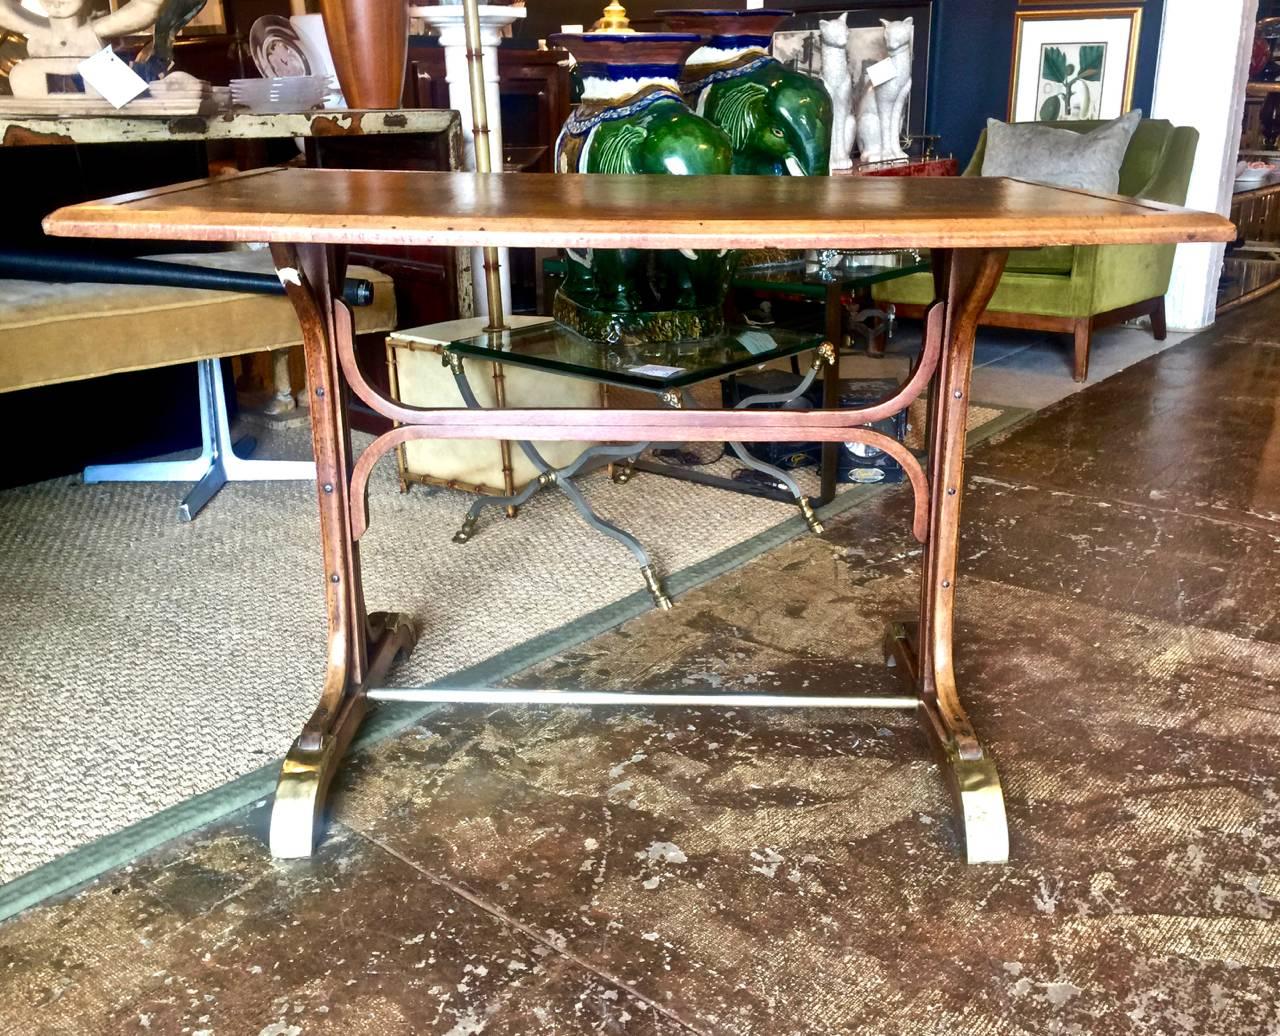 This is a charming original Thonet bistro table that retains all of its original elements with the exception of the replaced leather surface. The size of the table make it perfect for an intimate breakfast table, an unusual writing table or games